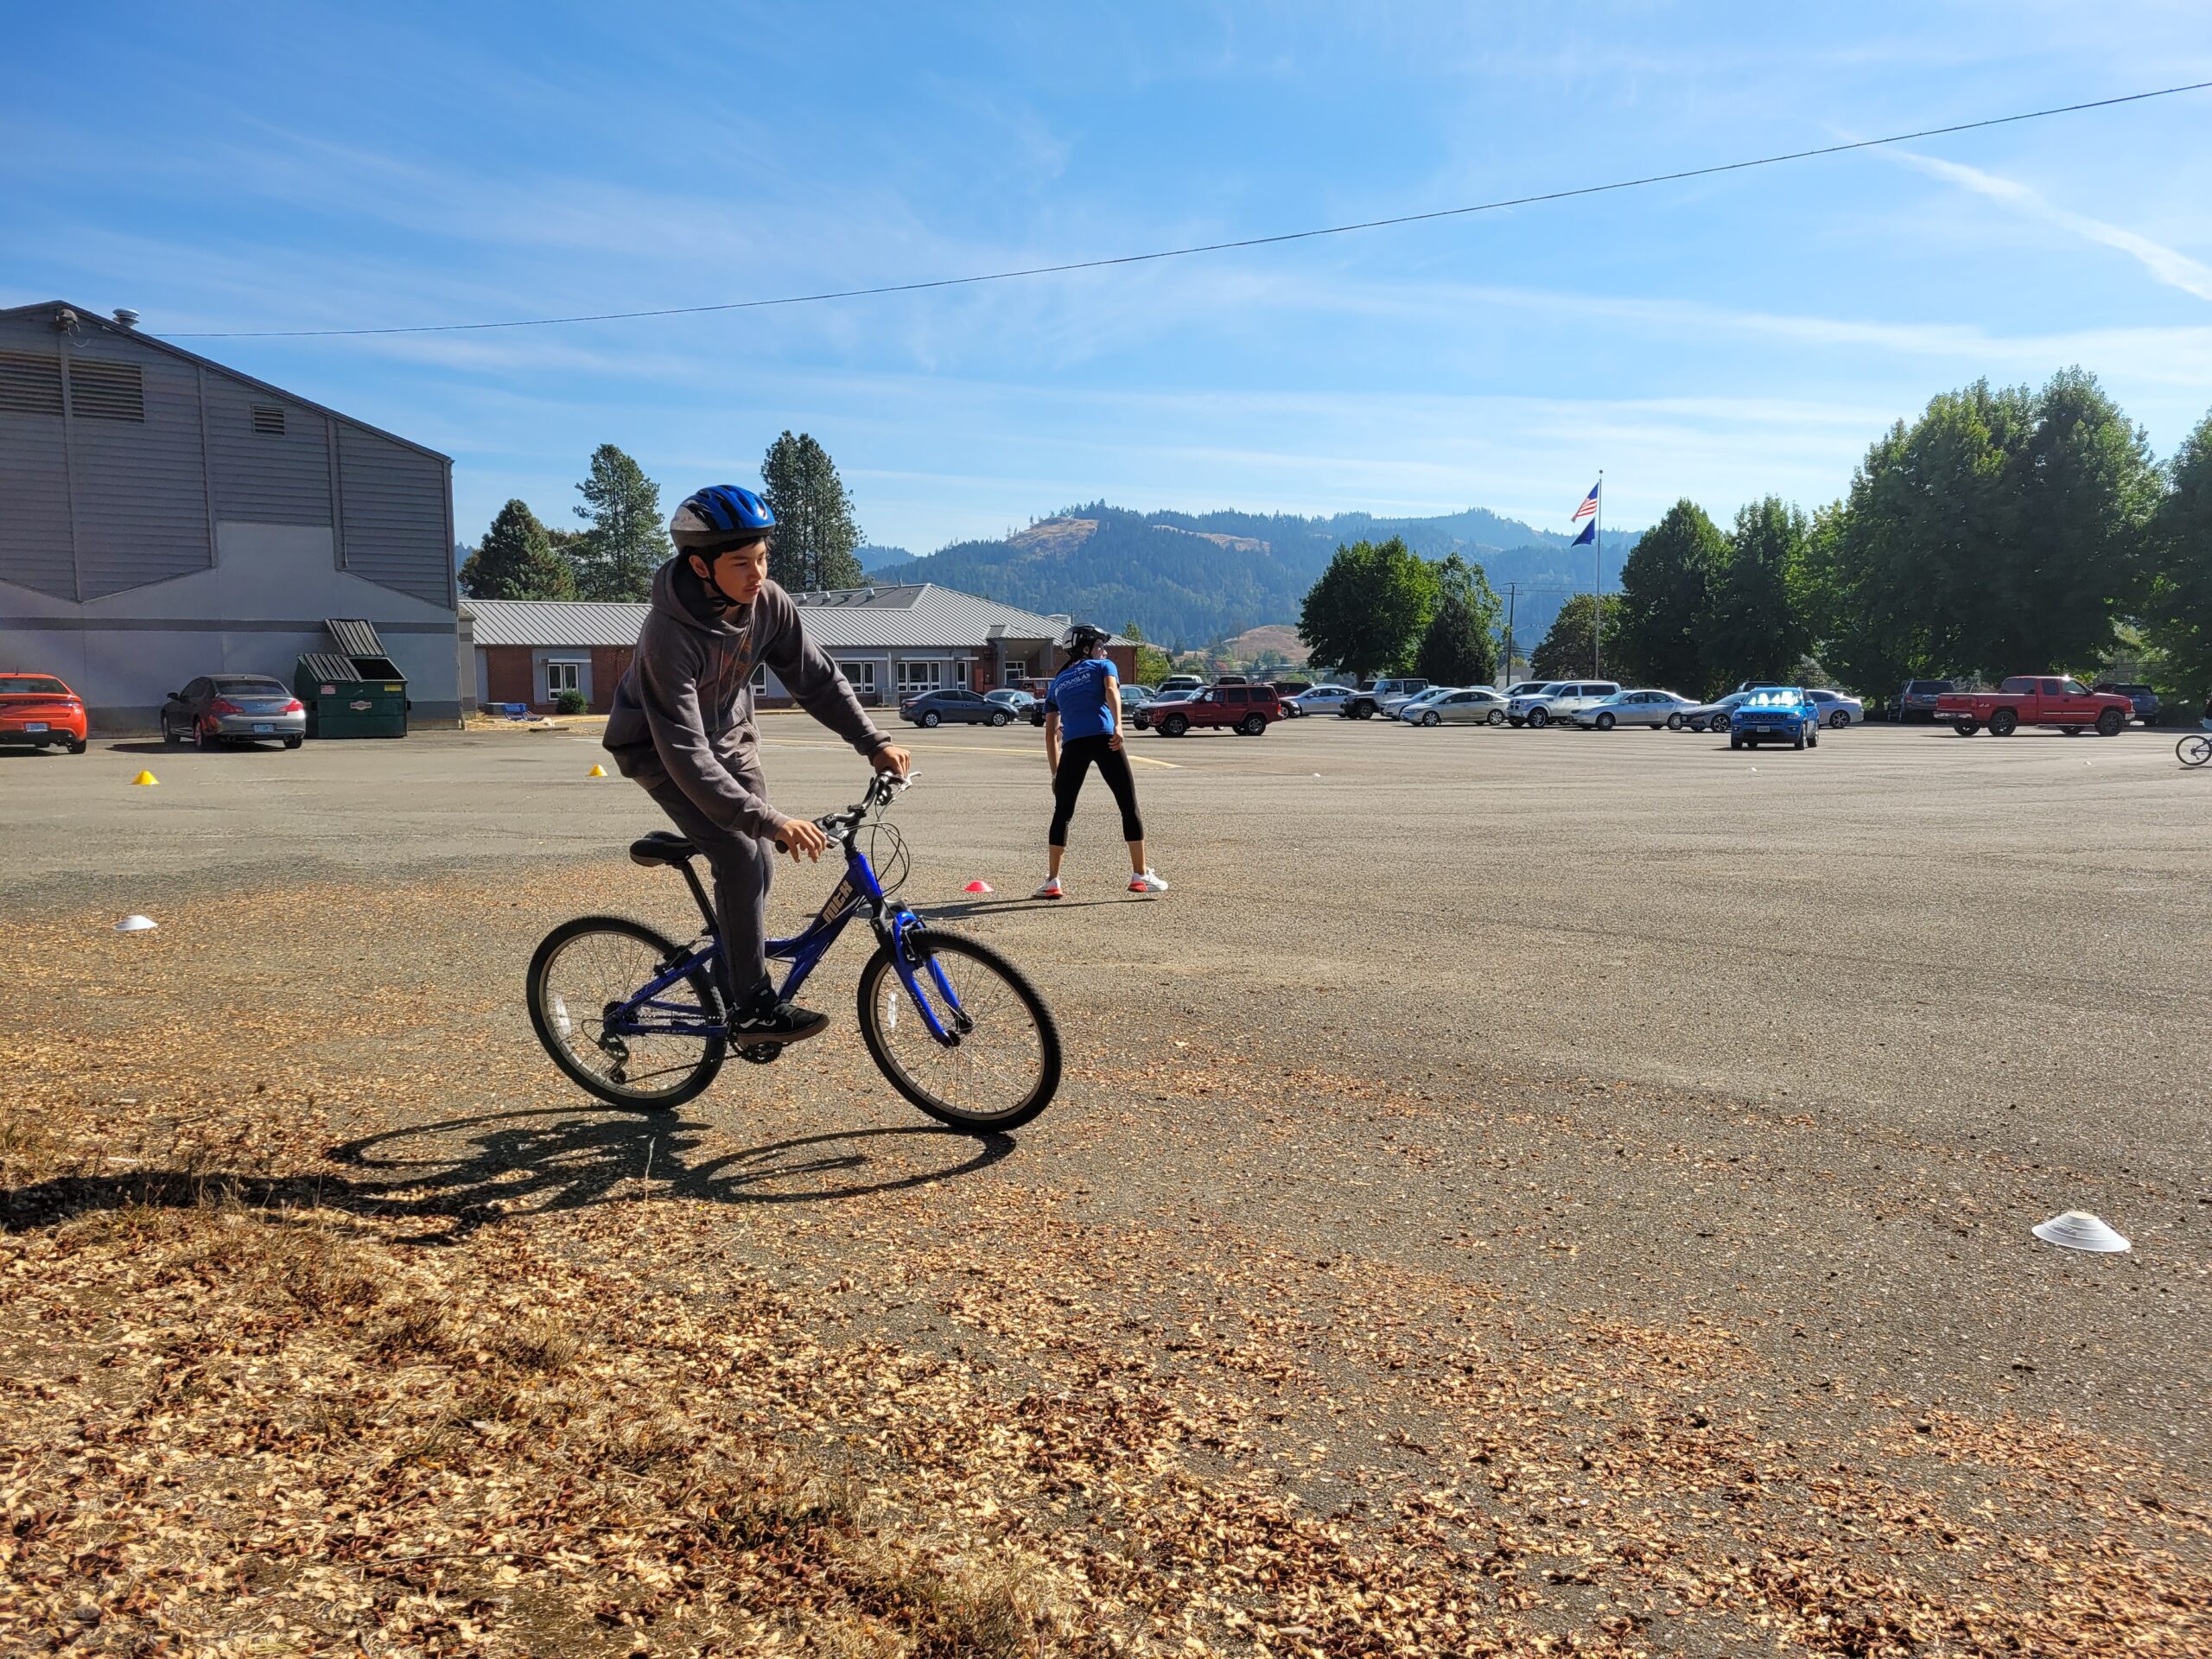 Jump Start Bicycle Safety Training in Action